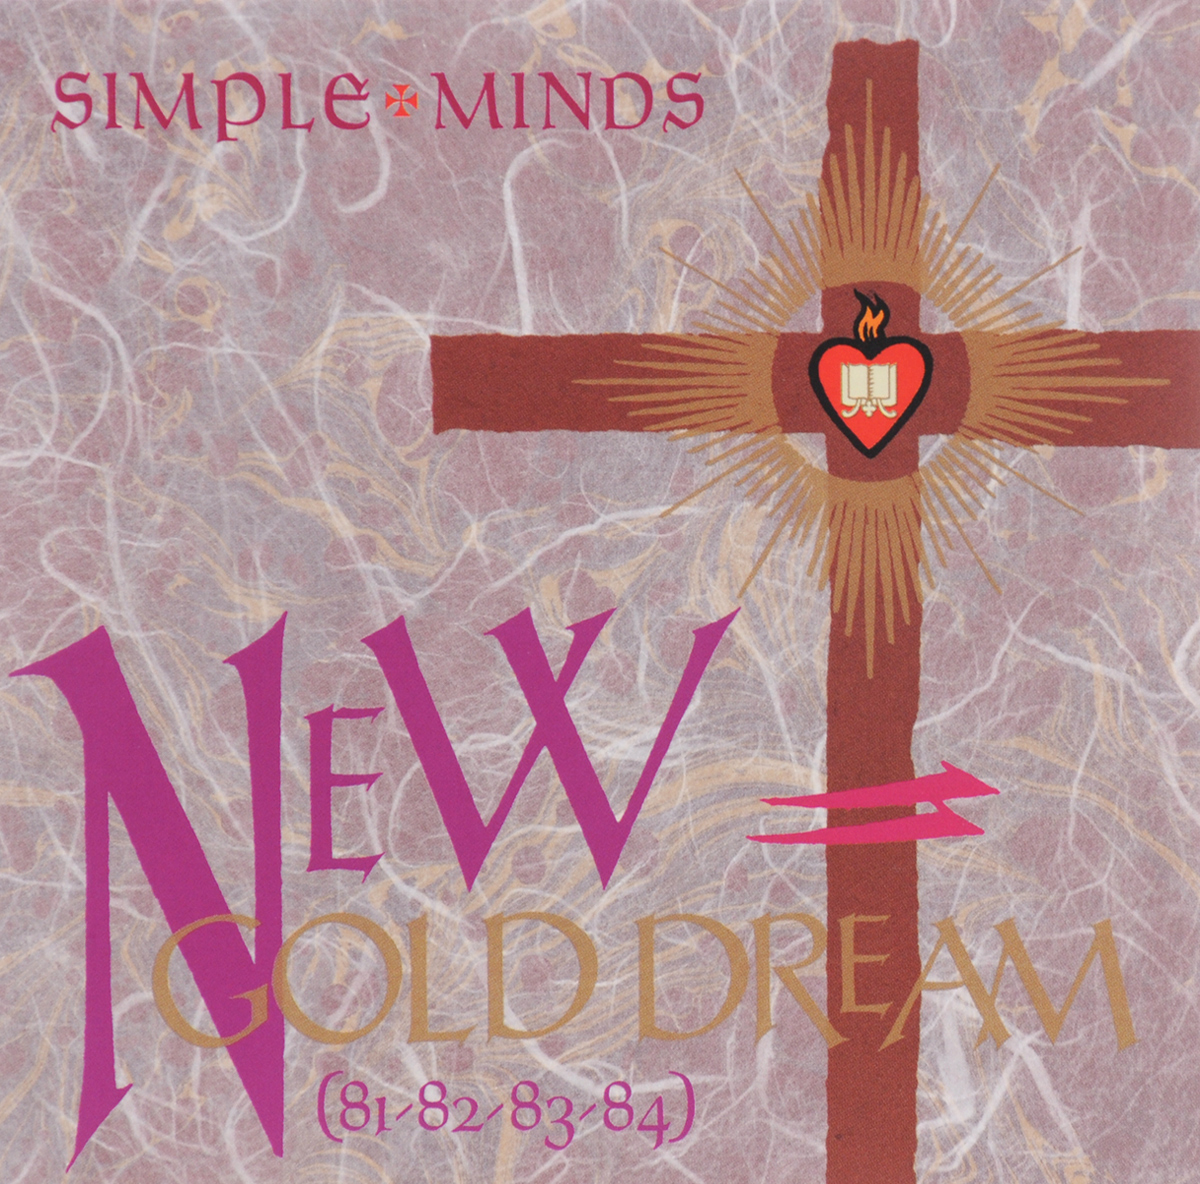 Simple Minds. New Gold Dream (81/82/83/84)